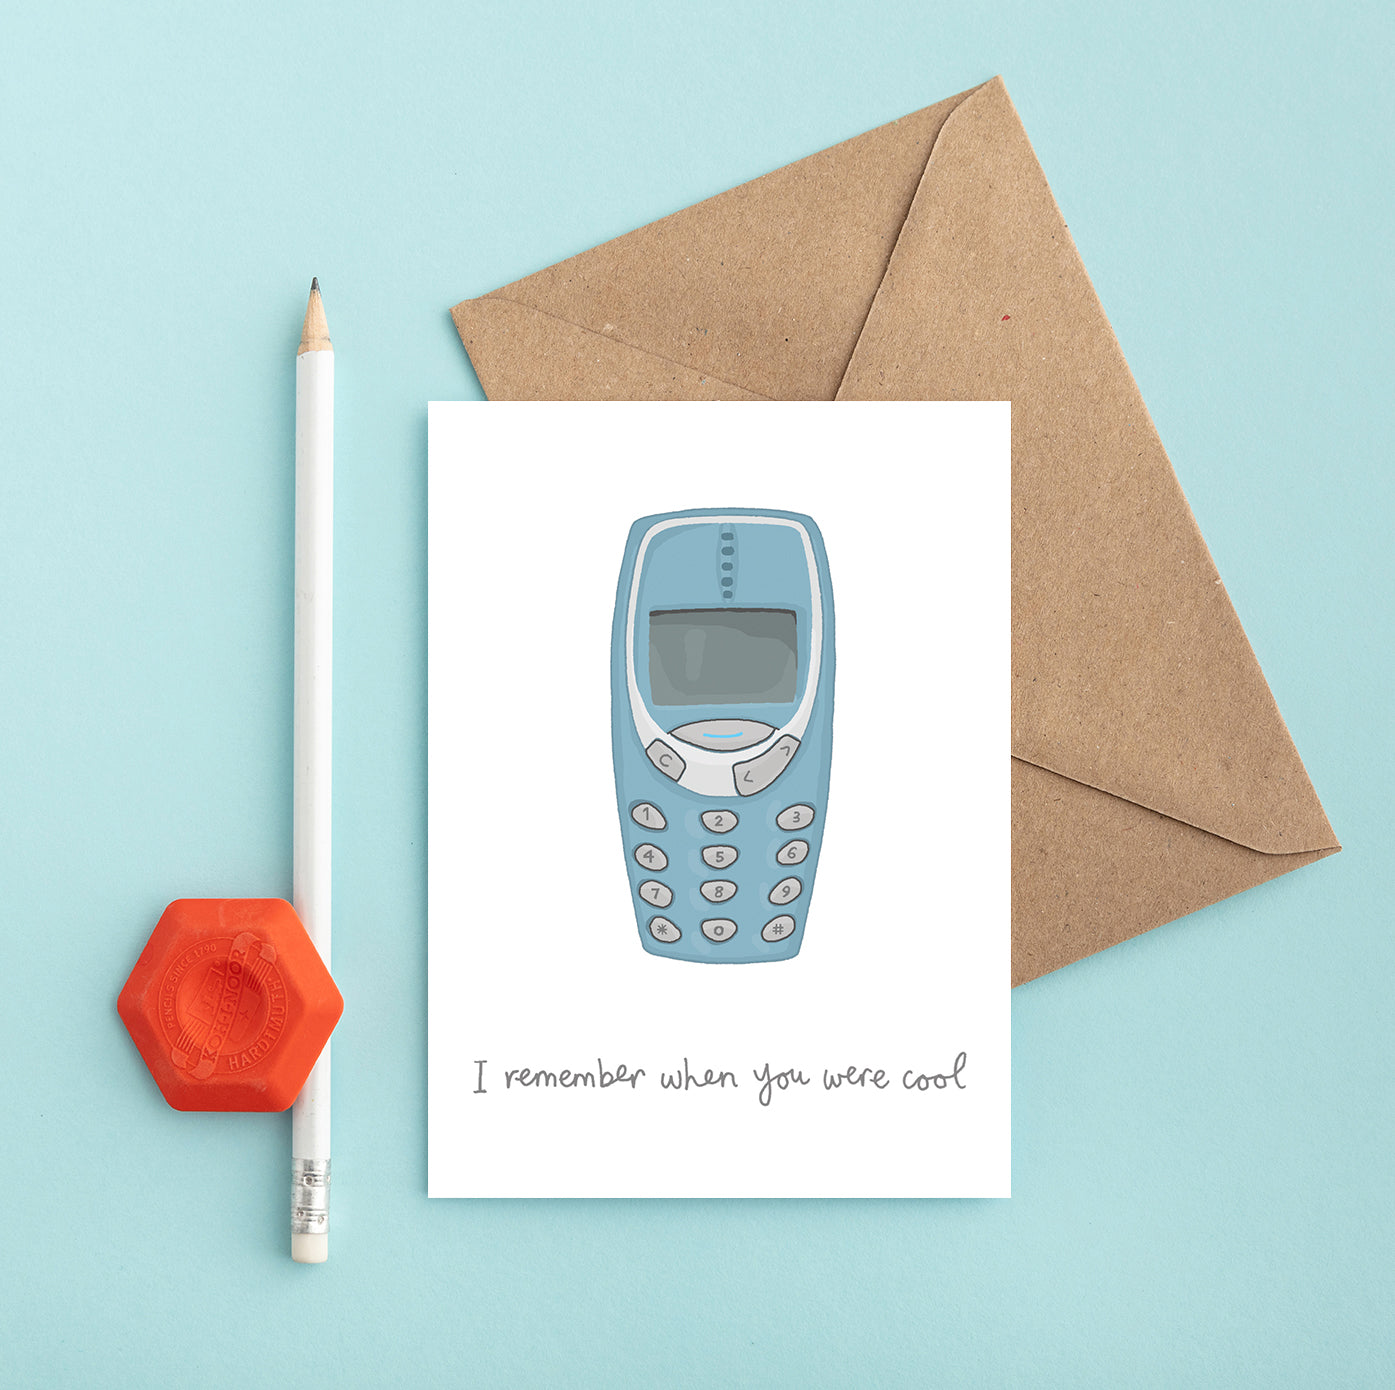 A retro birthday card with an illustration of a nokia